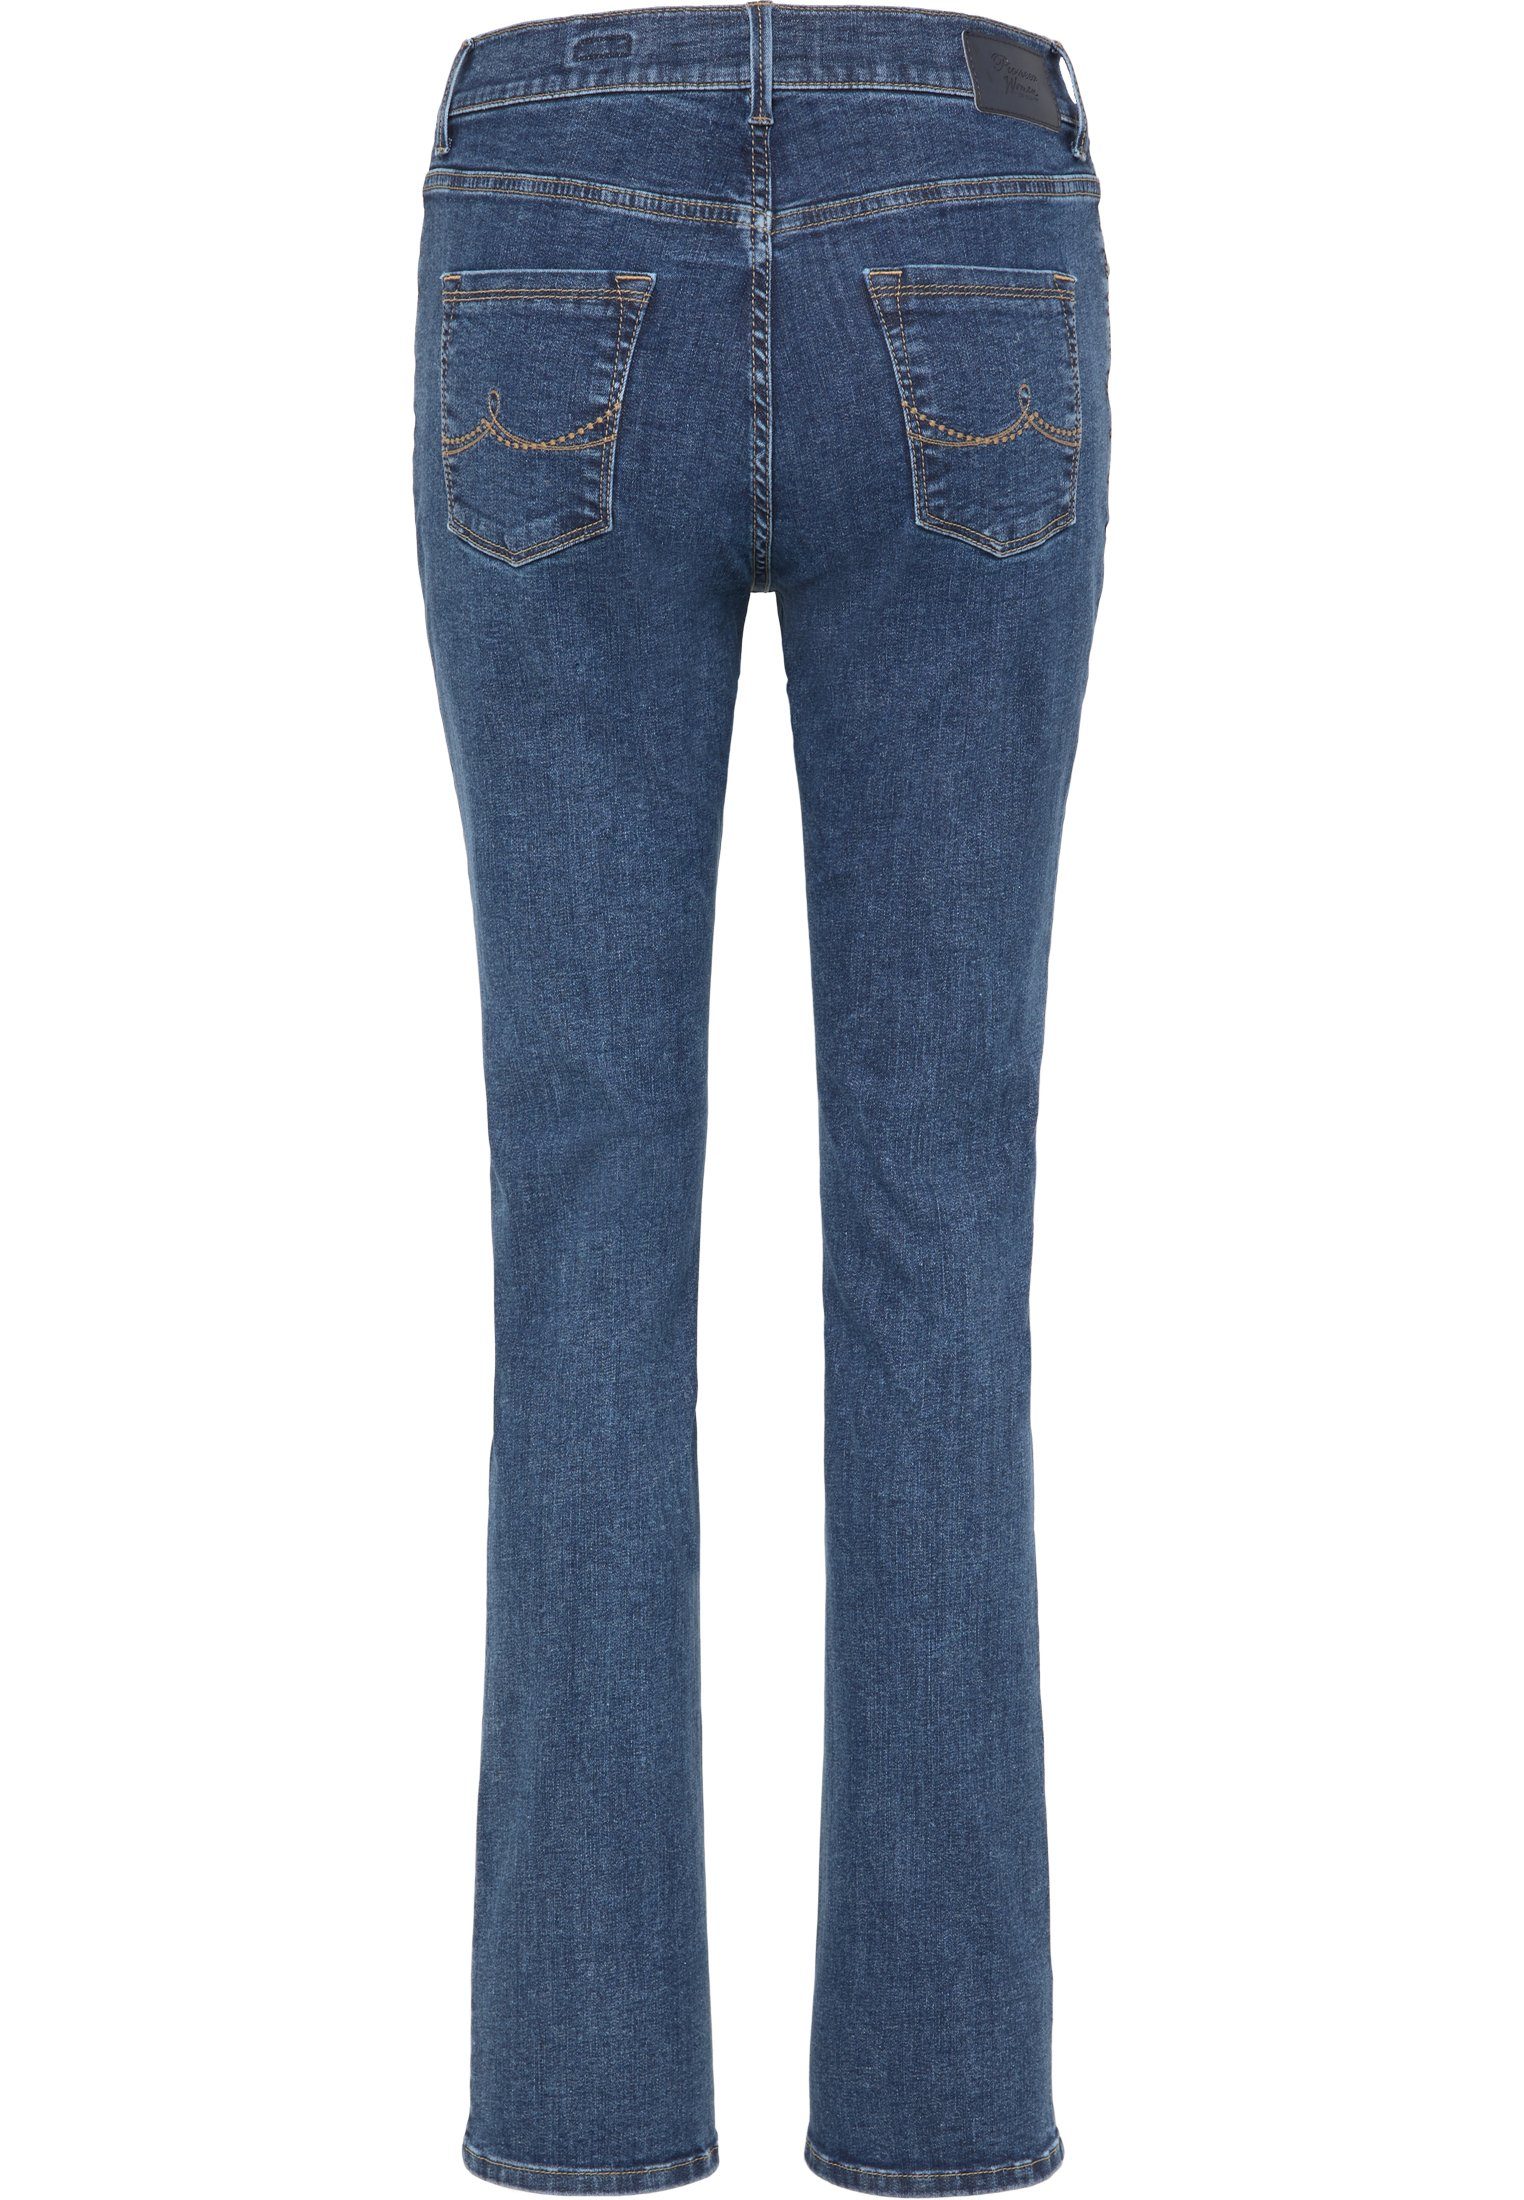 - 3213 PIONEER mid Stretch-Jeans Pioneer 4010.05 KATE Jeans blue Authentic POWERSTRETCH